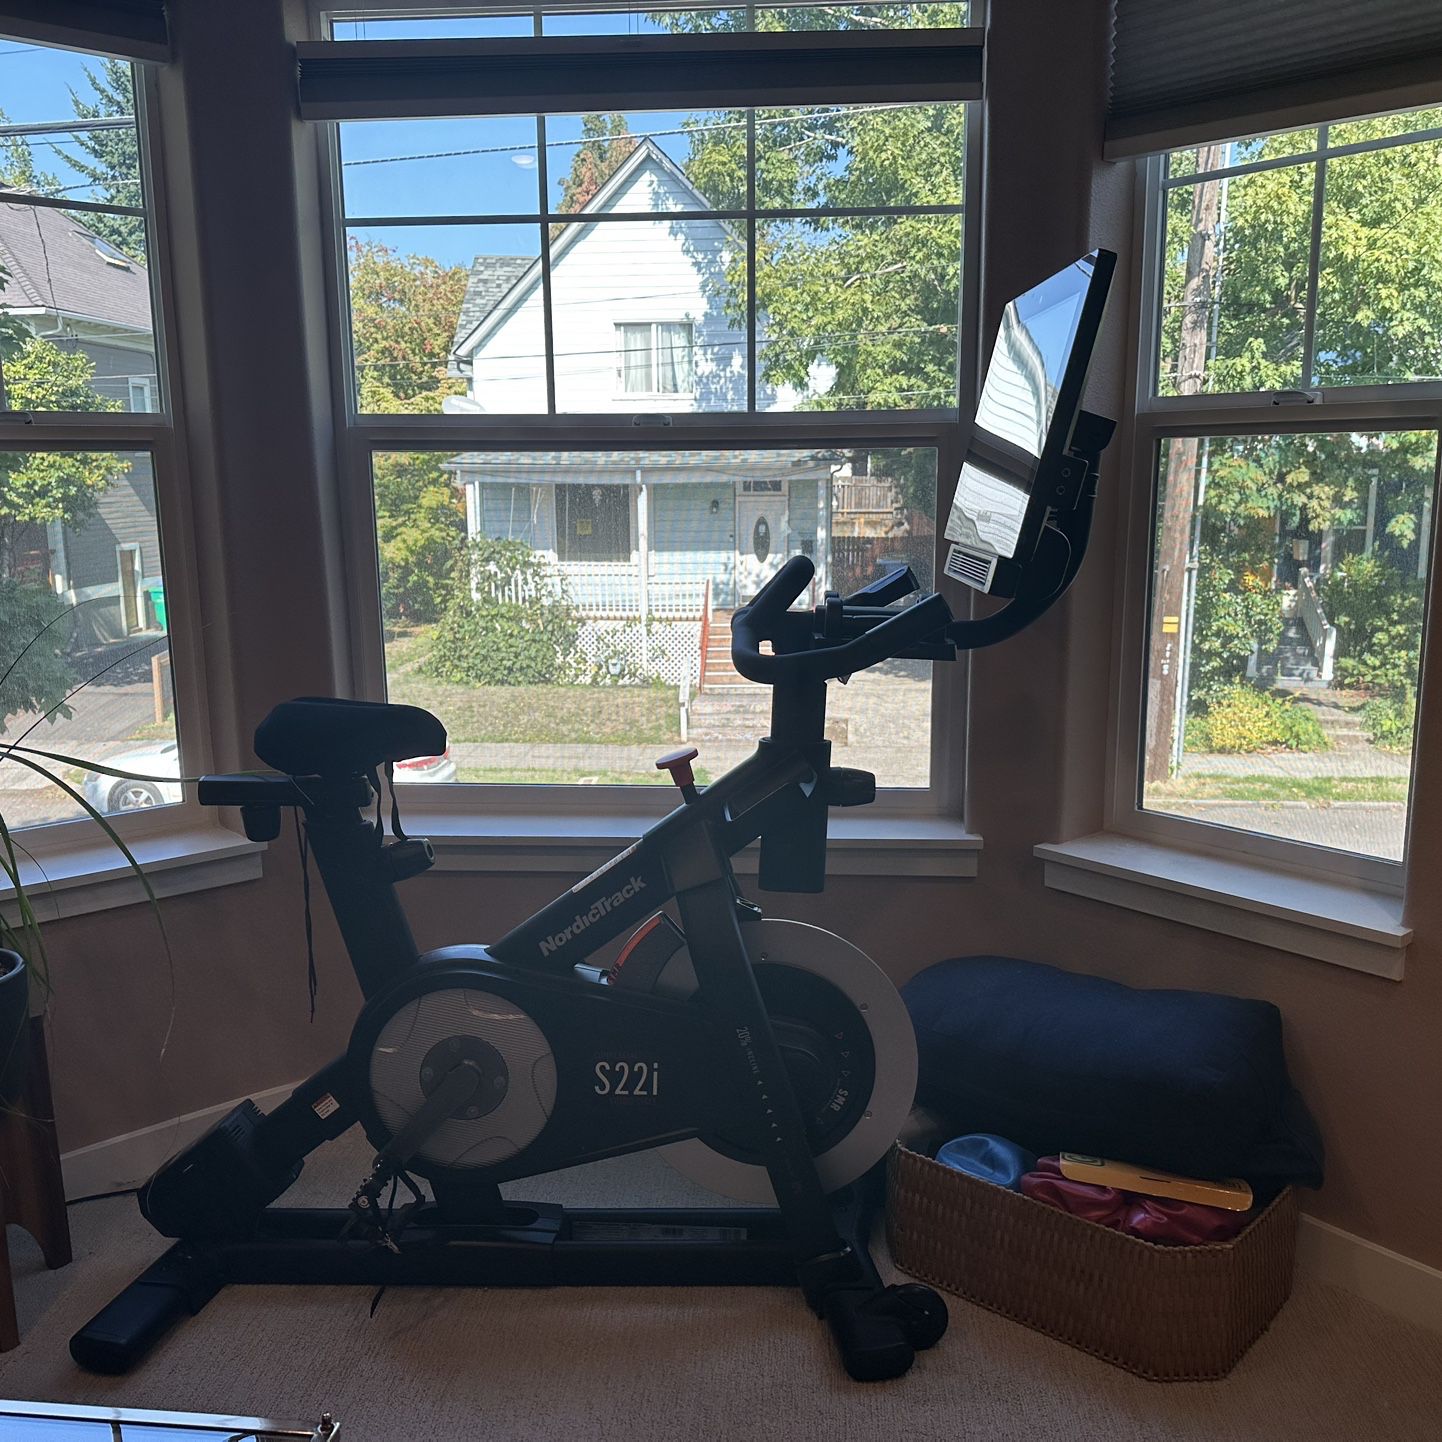 Nordictrack S22i bike With Swivel monitor